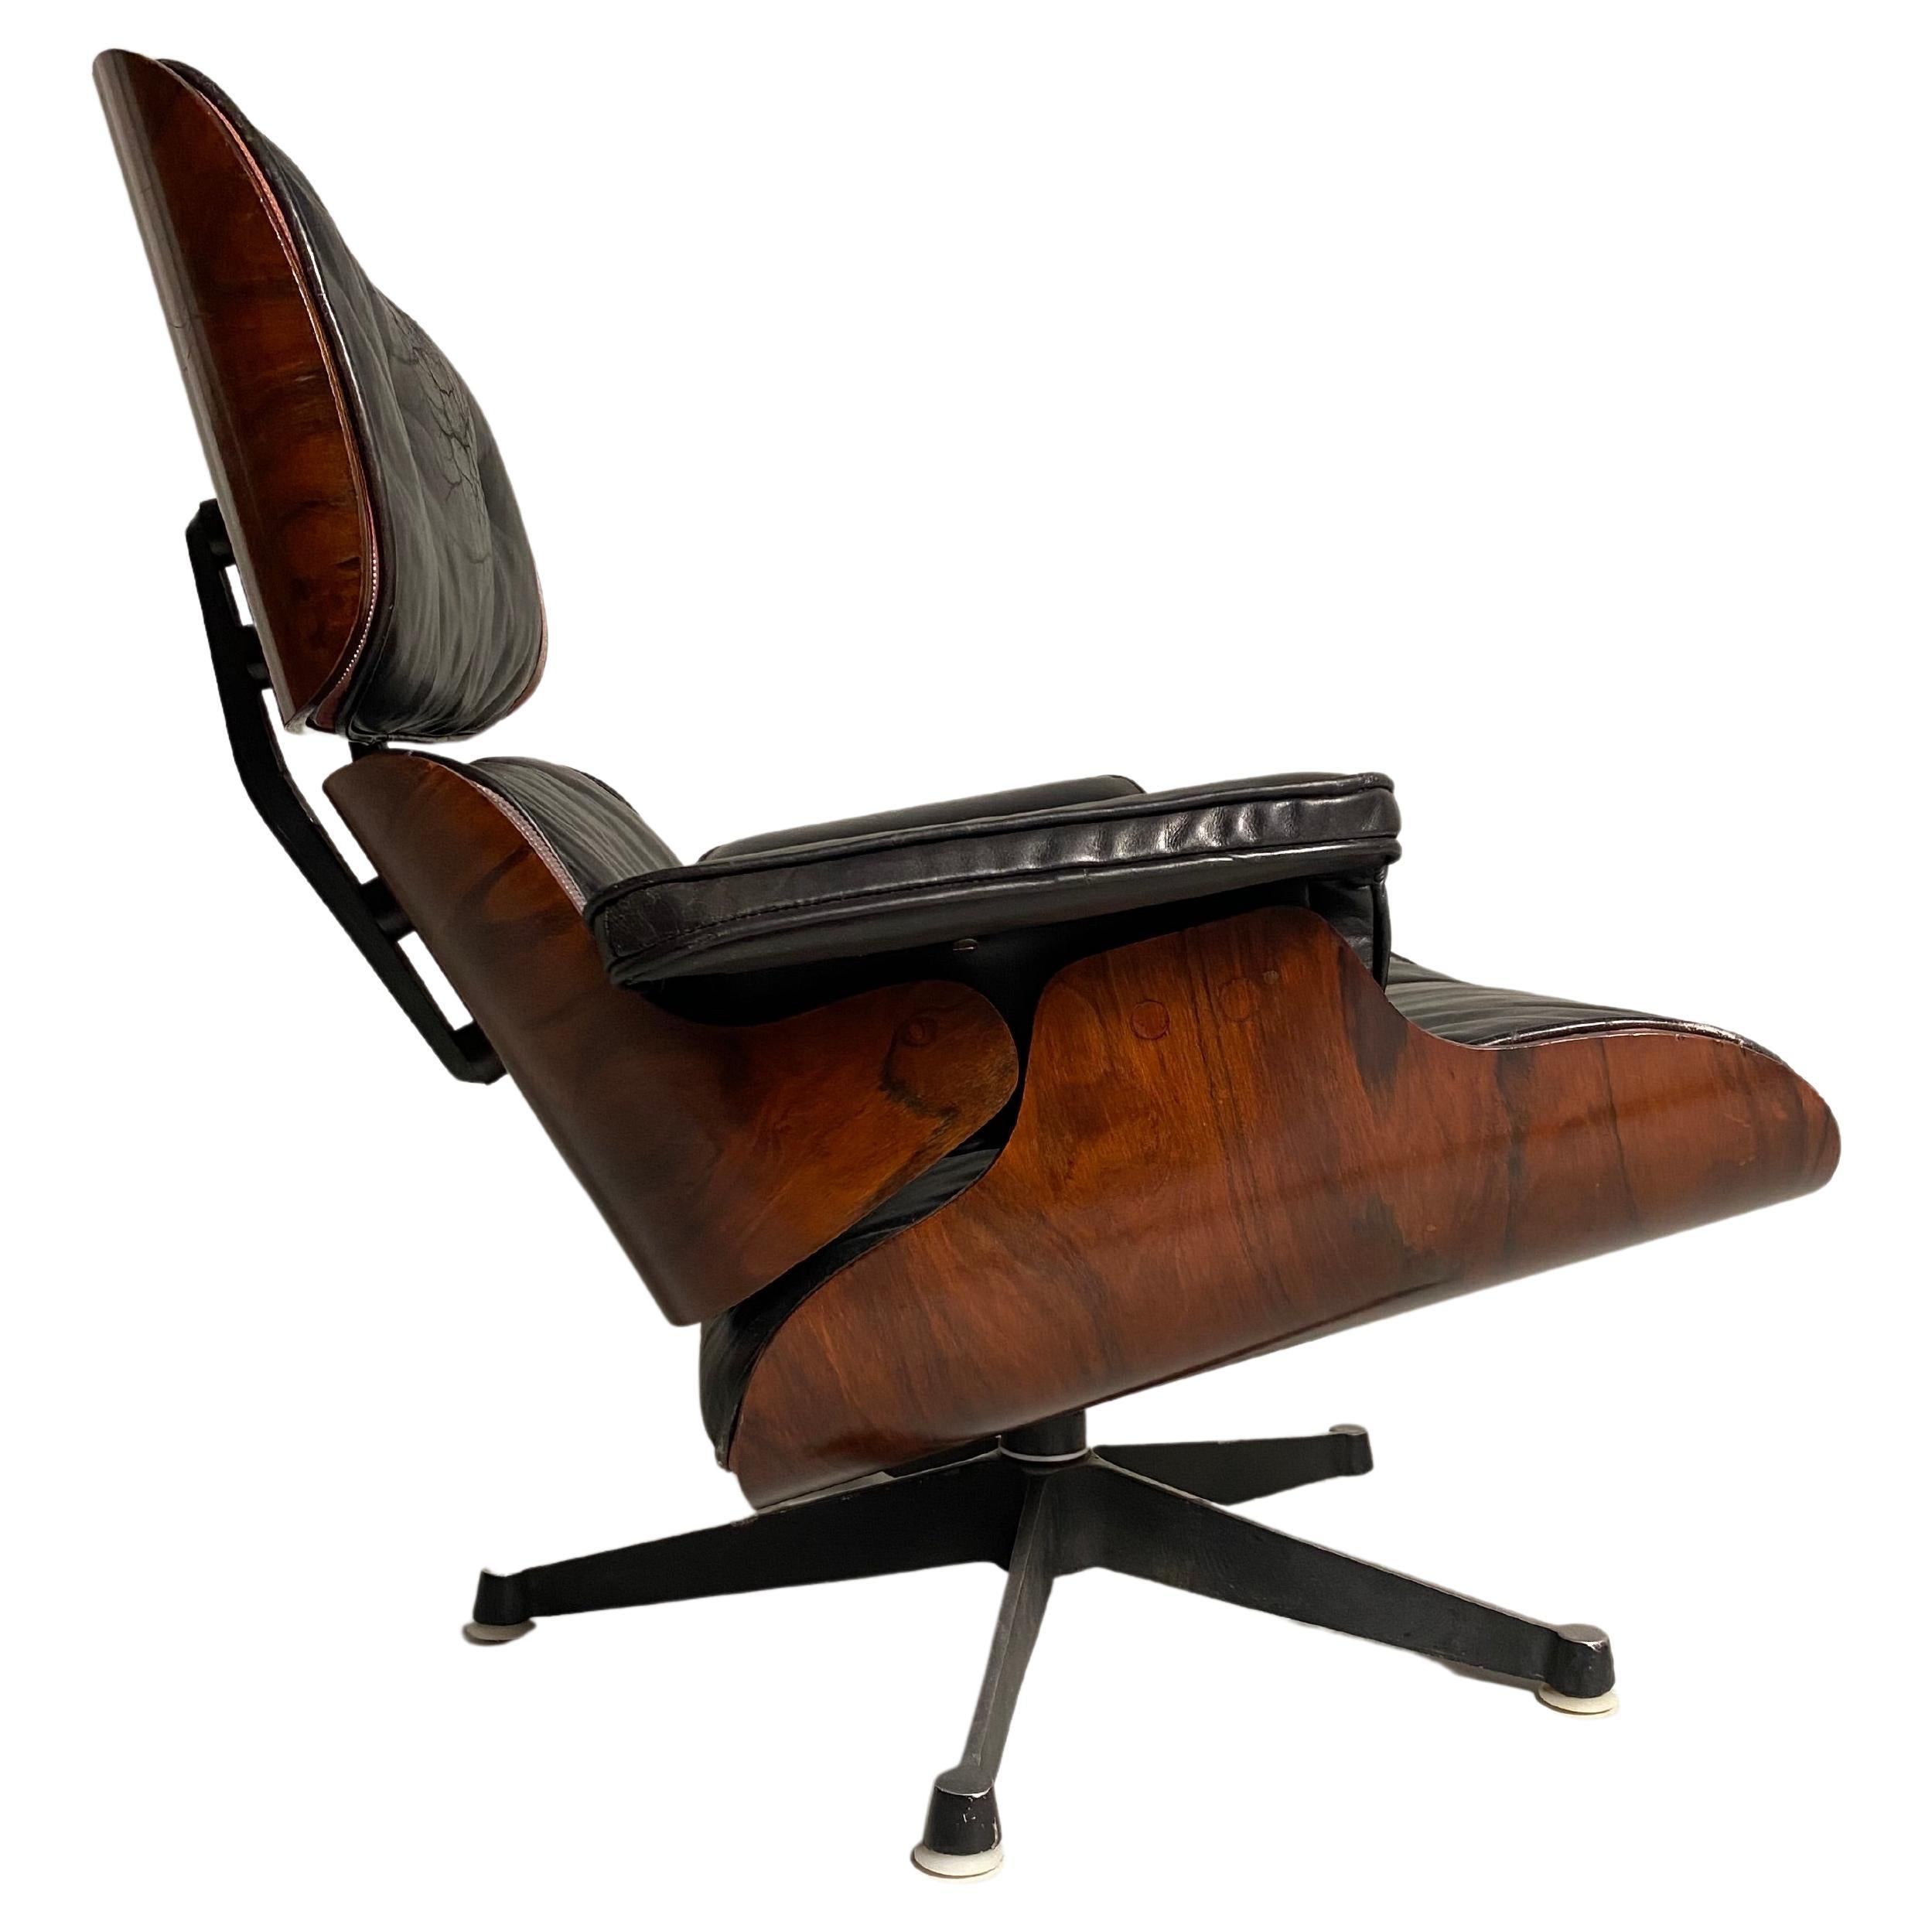 Eames Lounge is probably one of the most famous armchair designs in the world. The design couple Charles and Ray Eames designed  it in 1956 for Herman Miller. It was the first chair that the couple designed for a high-end market. Examples of these